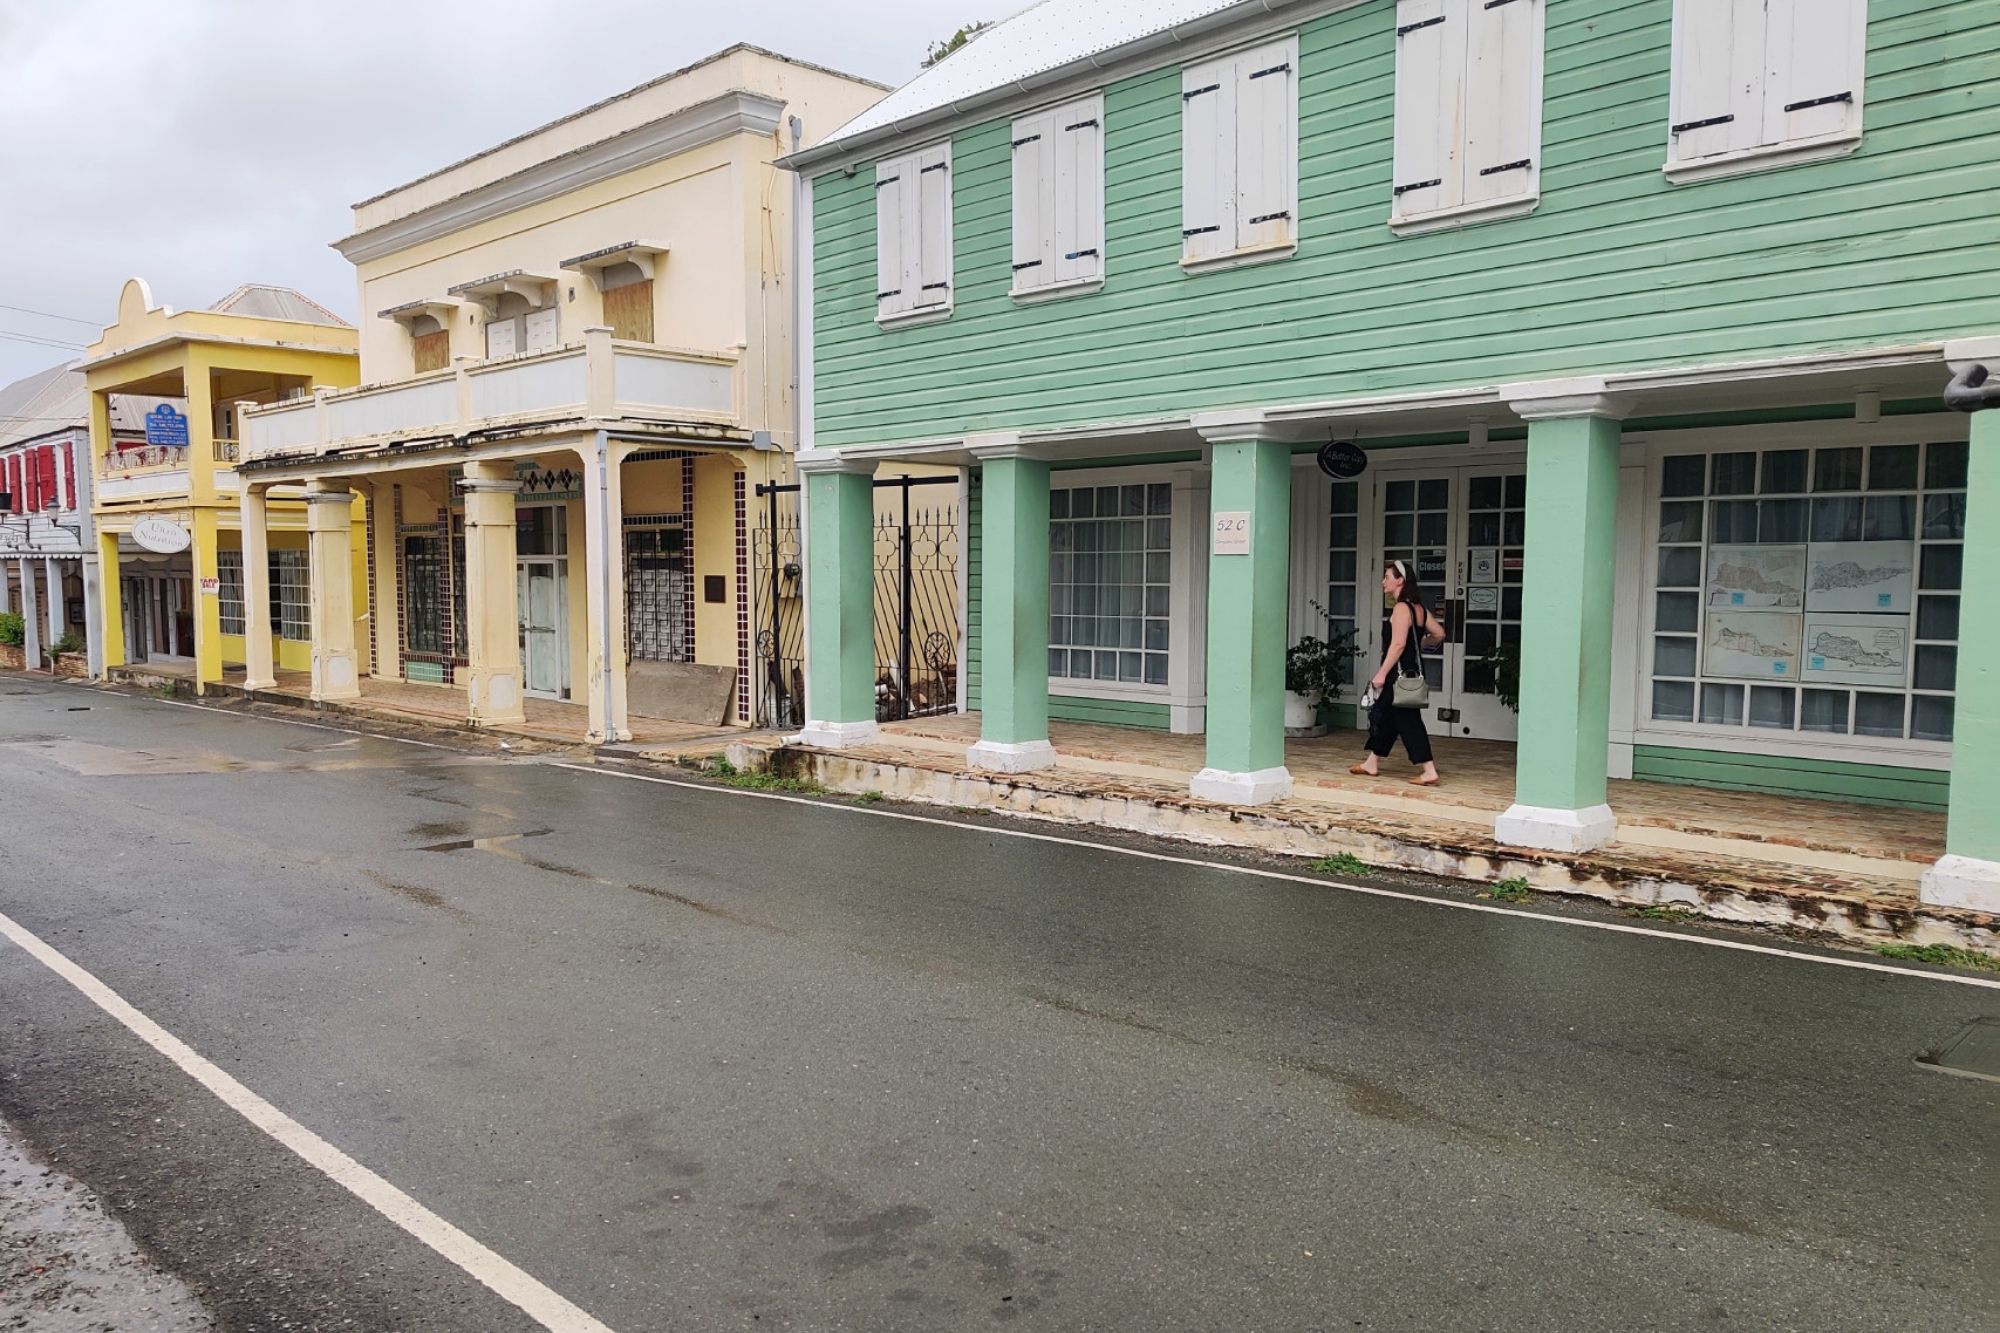 Alyssa stands among the pastel buildings in Christiansted